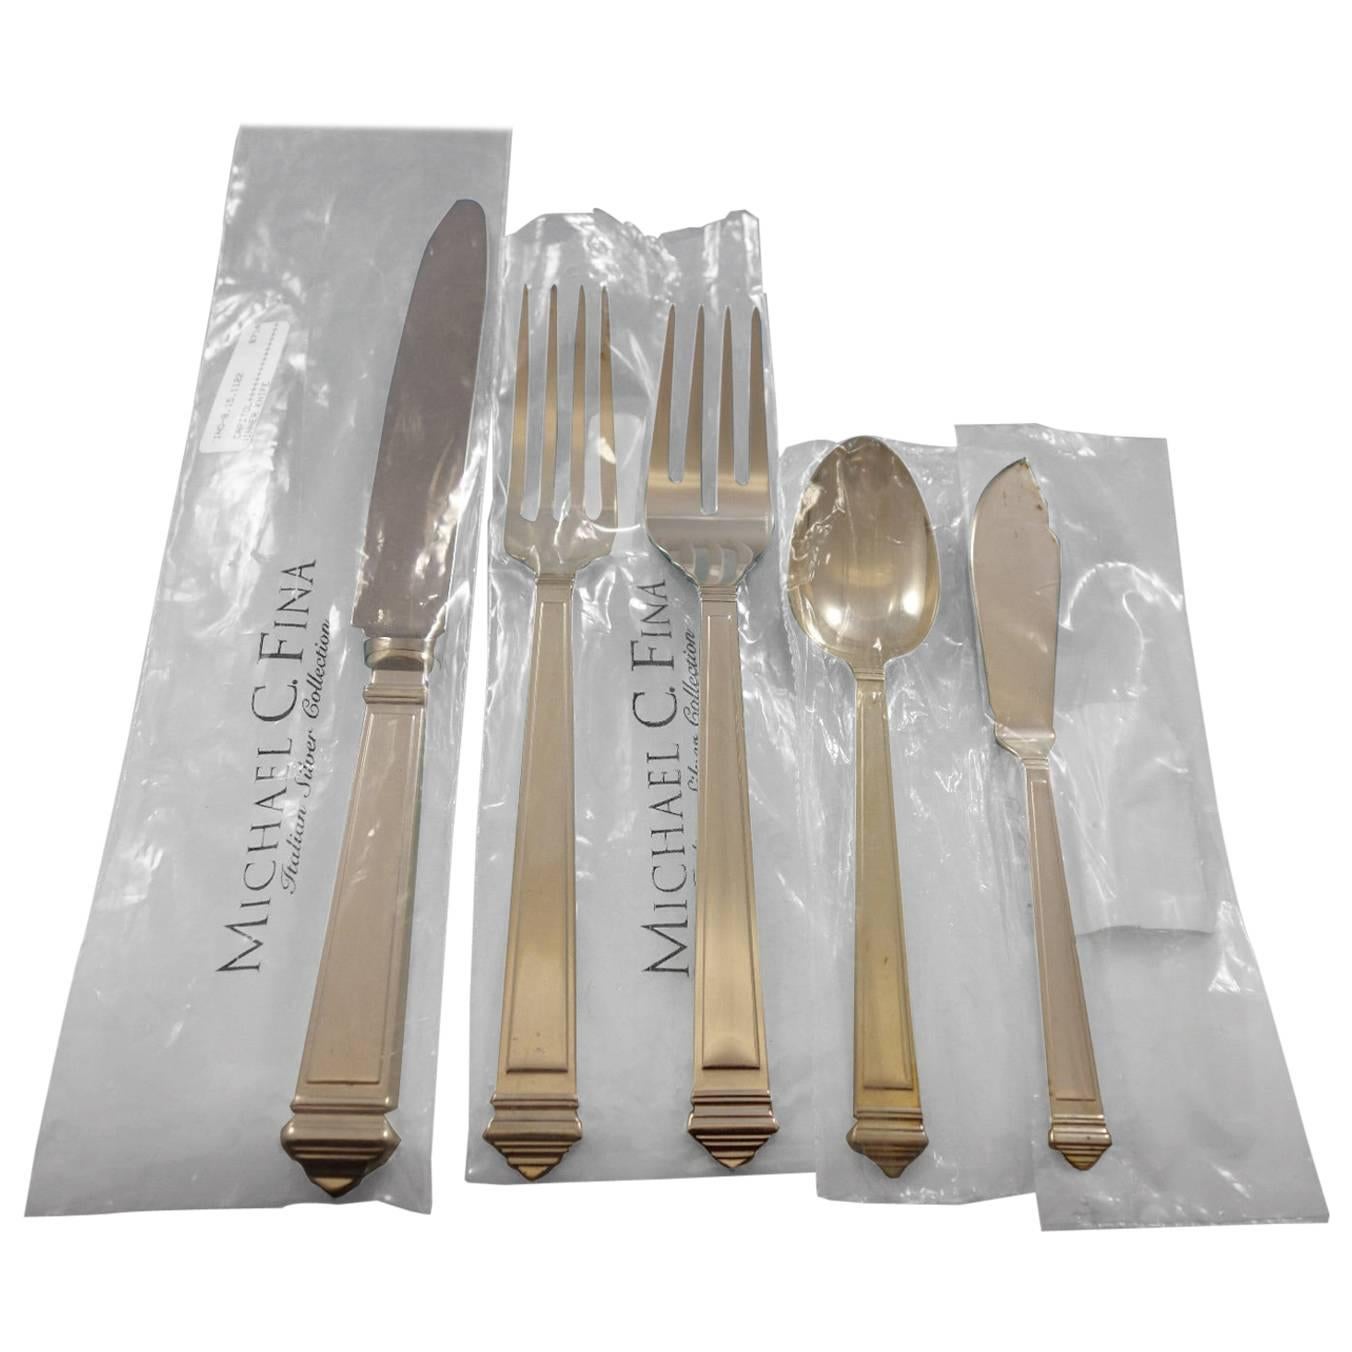 Capitol by Greggio Italy Sterling Silver Flatware Set Dinner Size 20 Pcs New